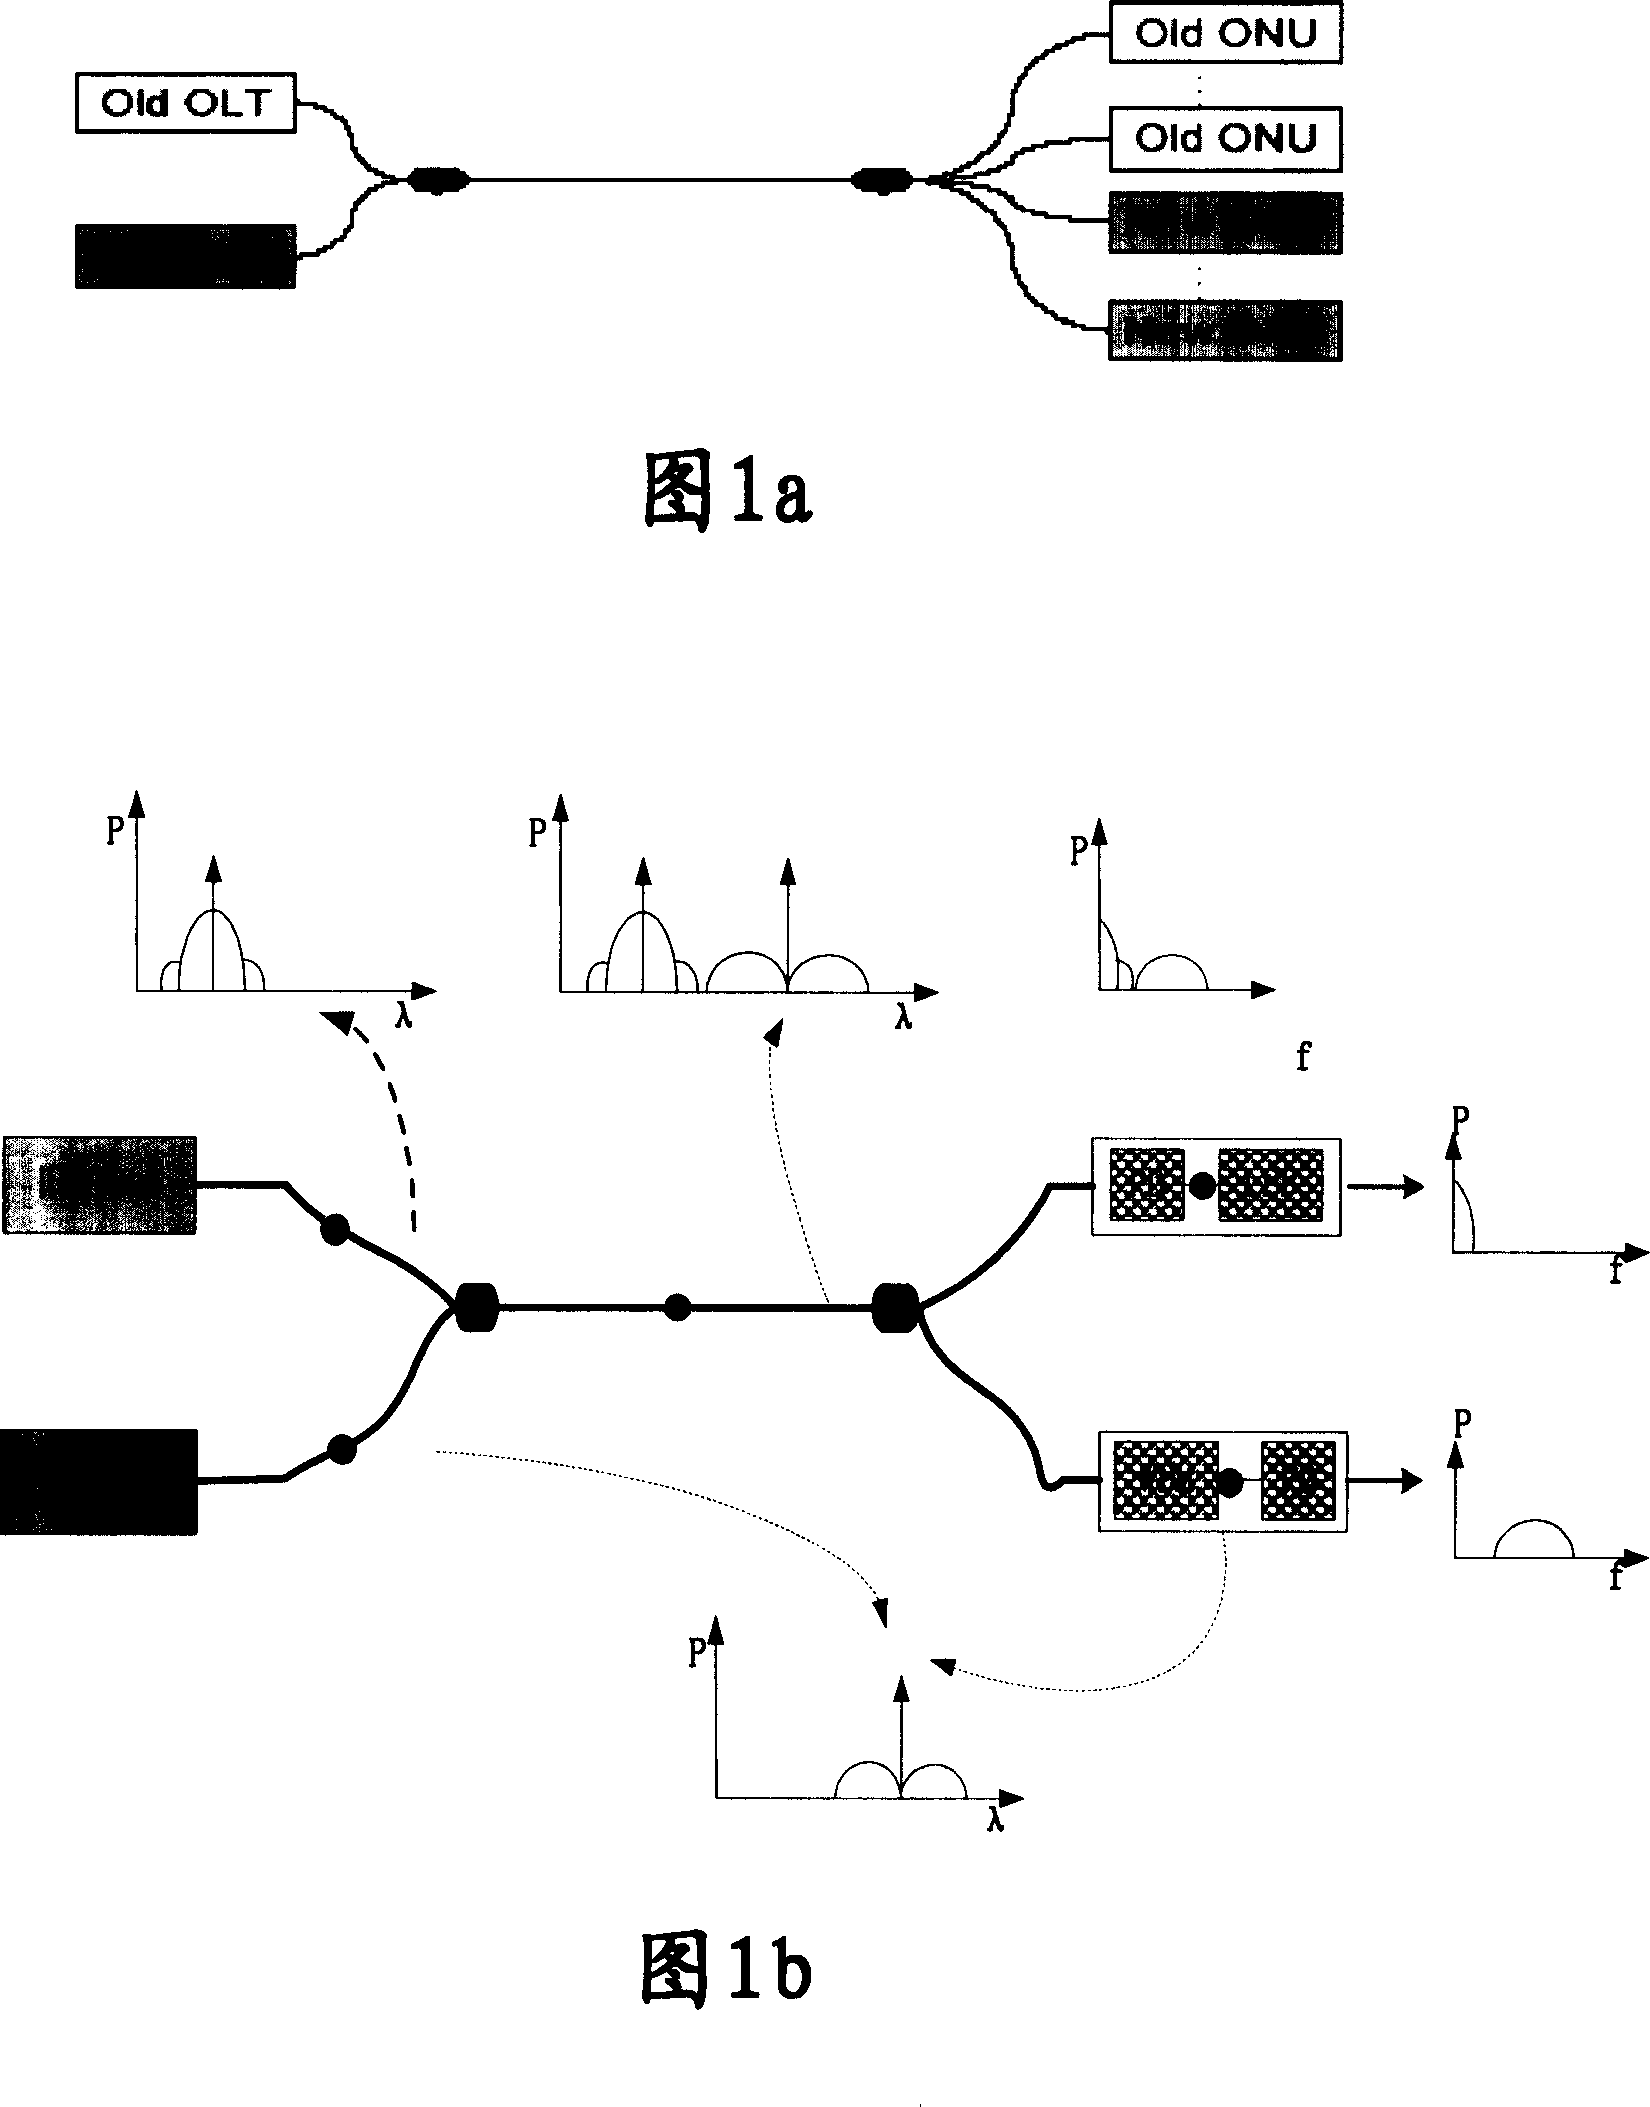 Method and system for upgrading passive optical network